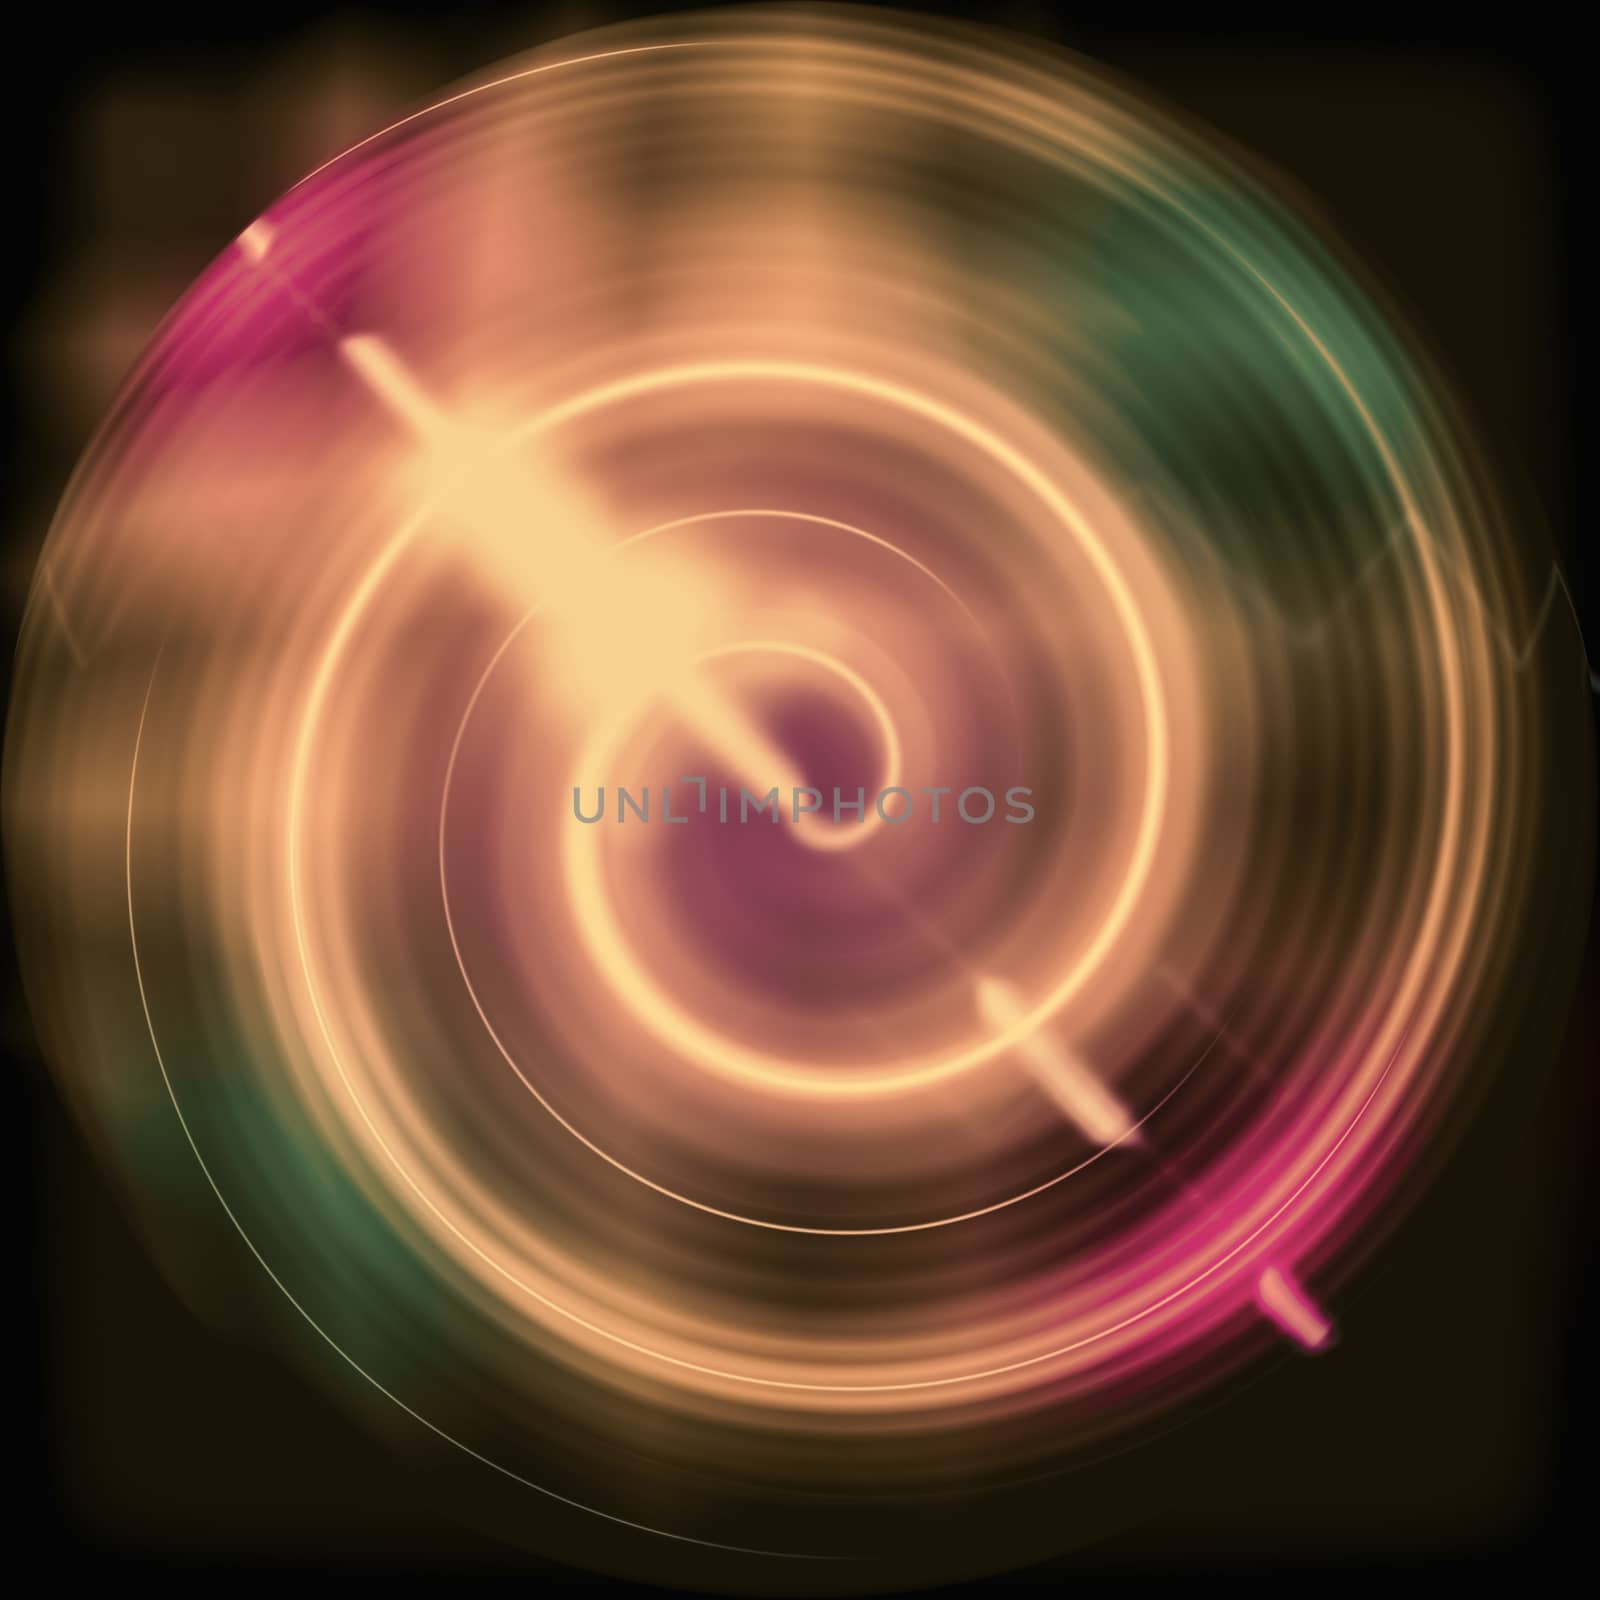 Abstract background image in the form of a spiral of bright neon colors on a black background.